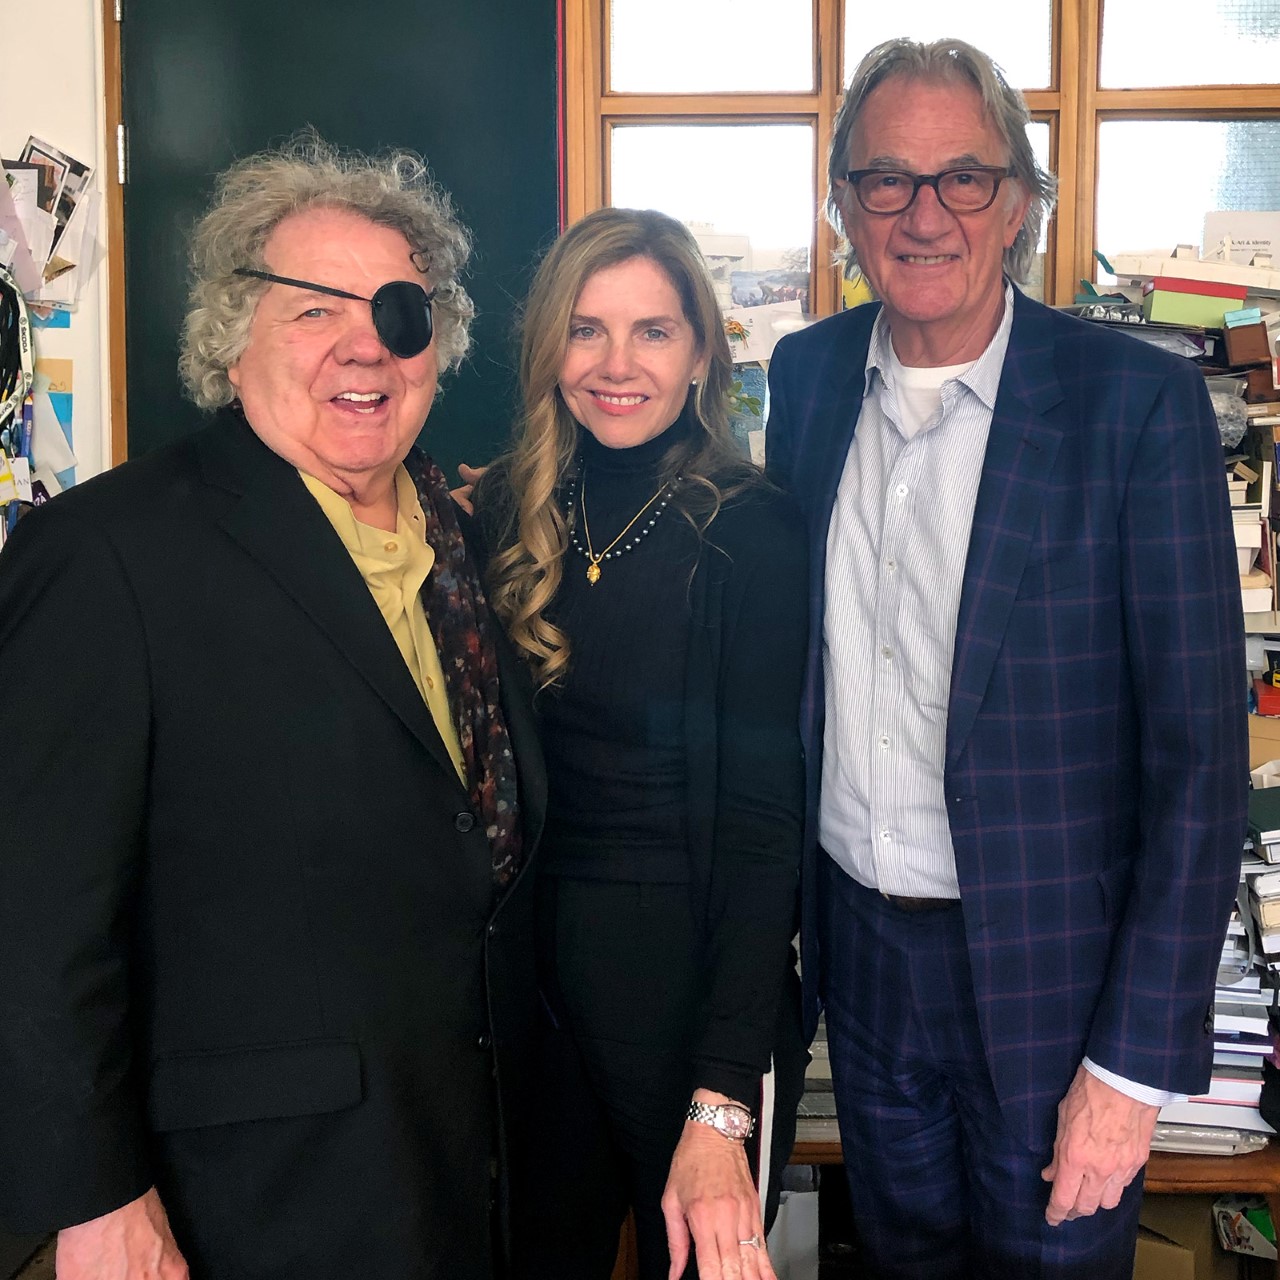 Chihuly, Leslie Jackson Chihuly, and Sir Paul Smith, 2019